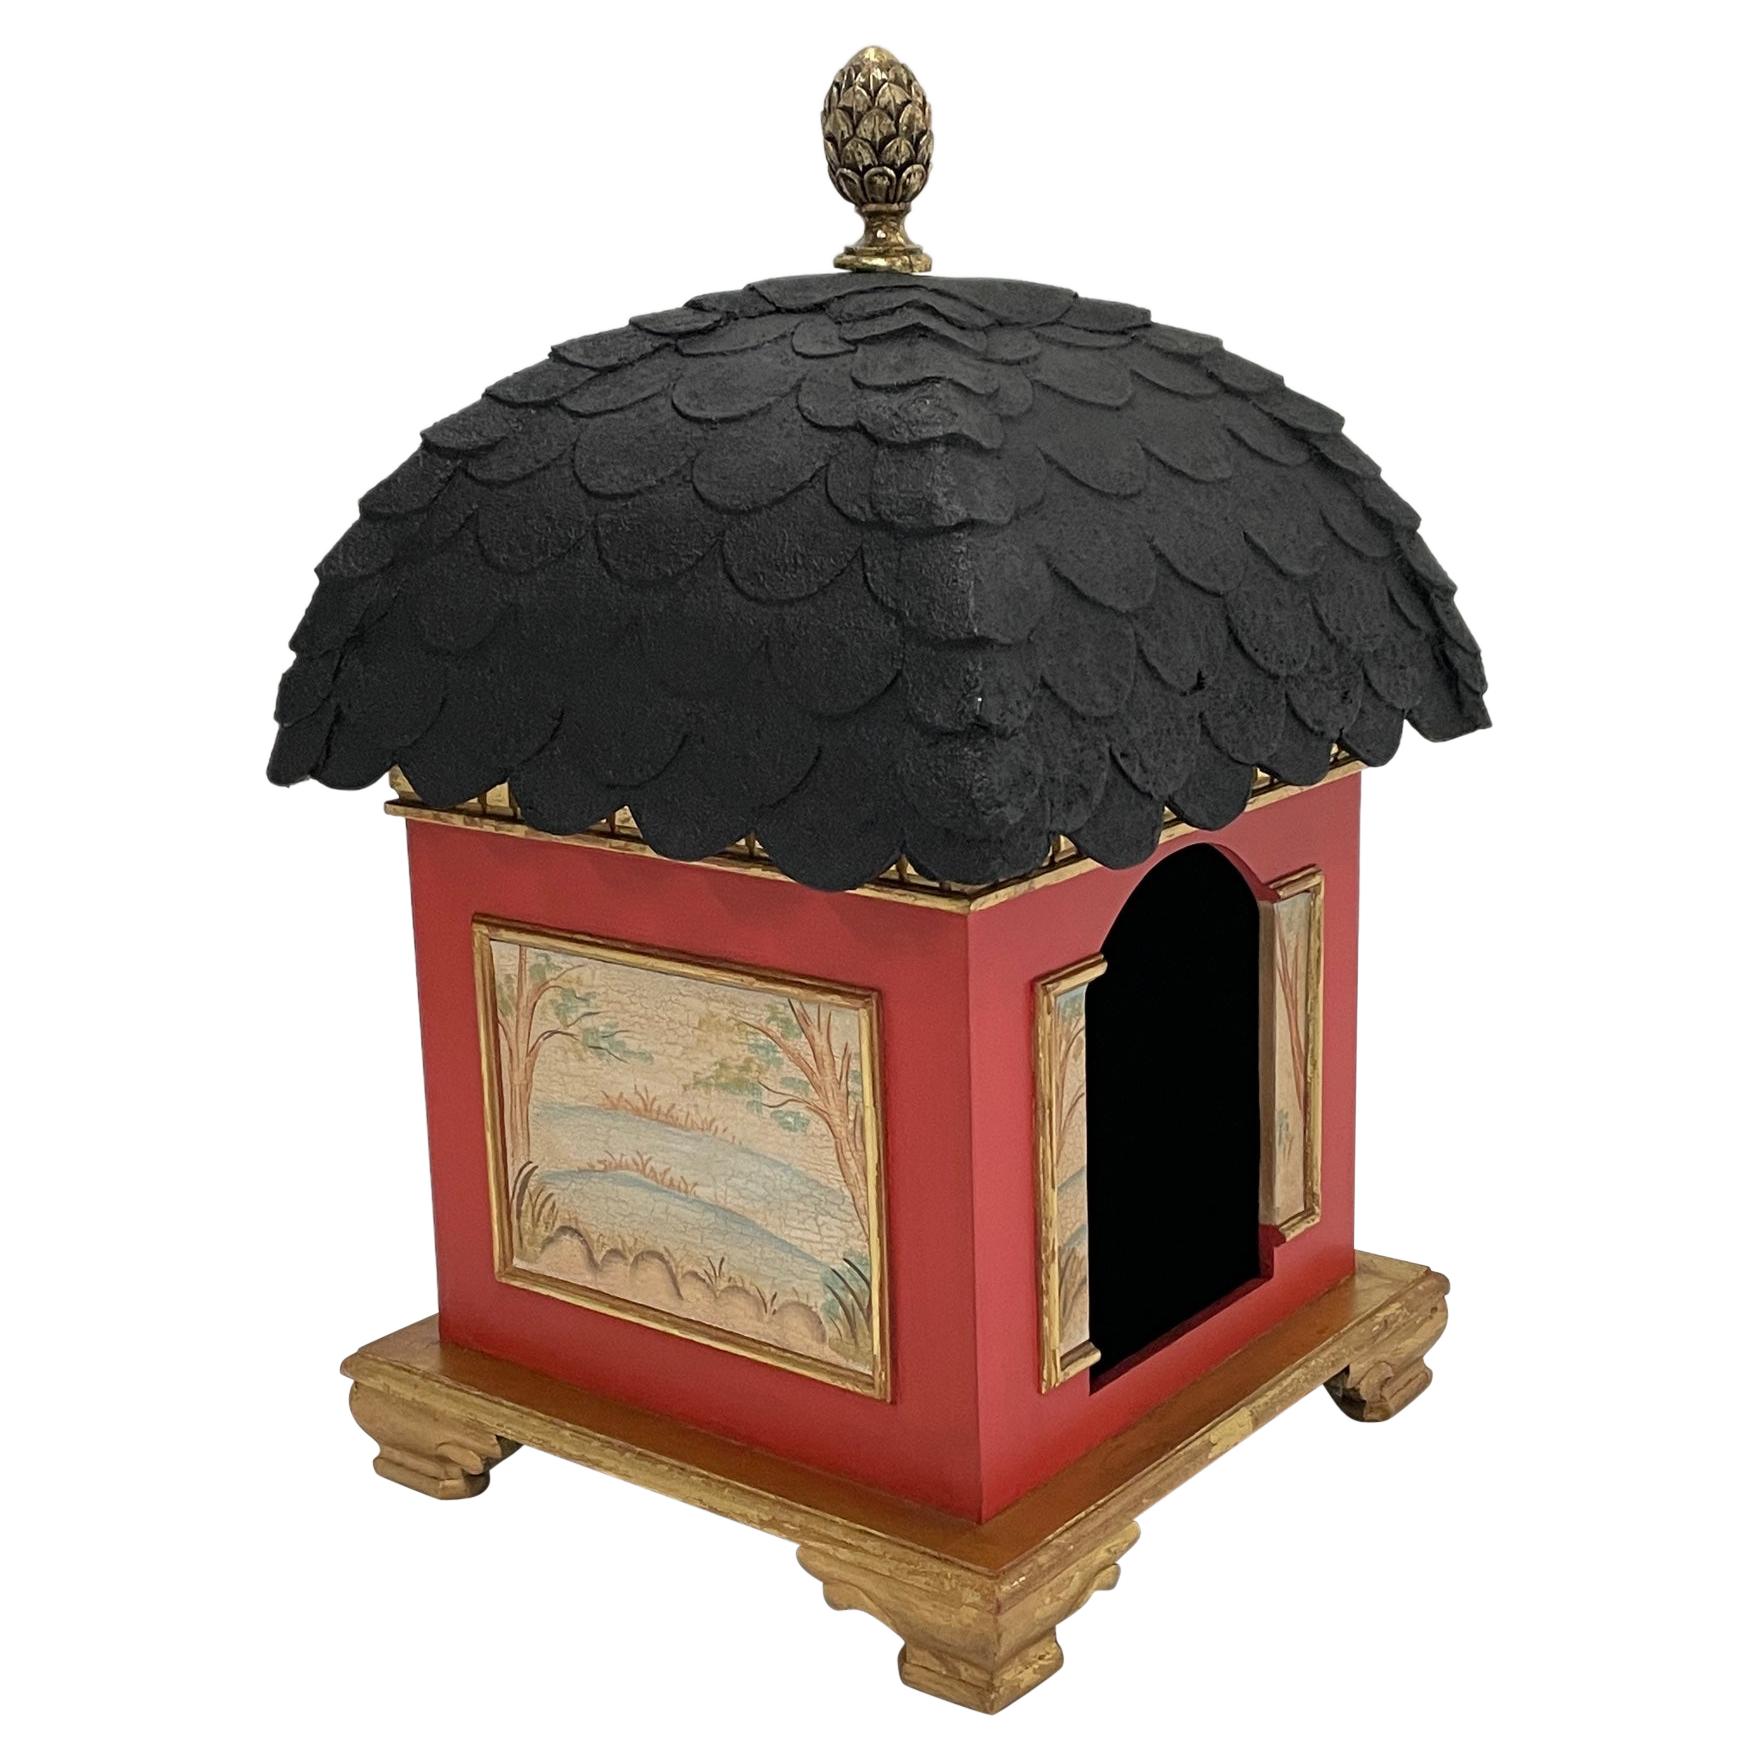 Palatial Hollywood Regency Doghouse for Lucky Pet